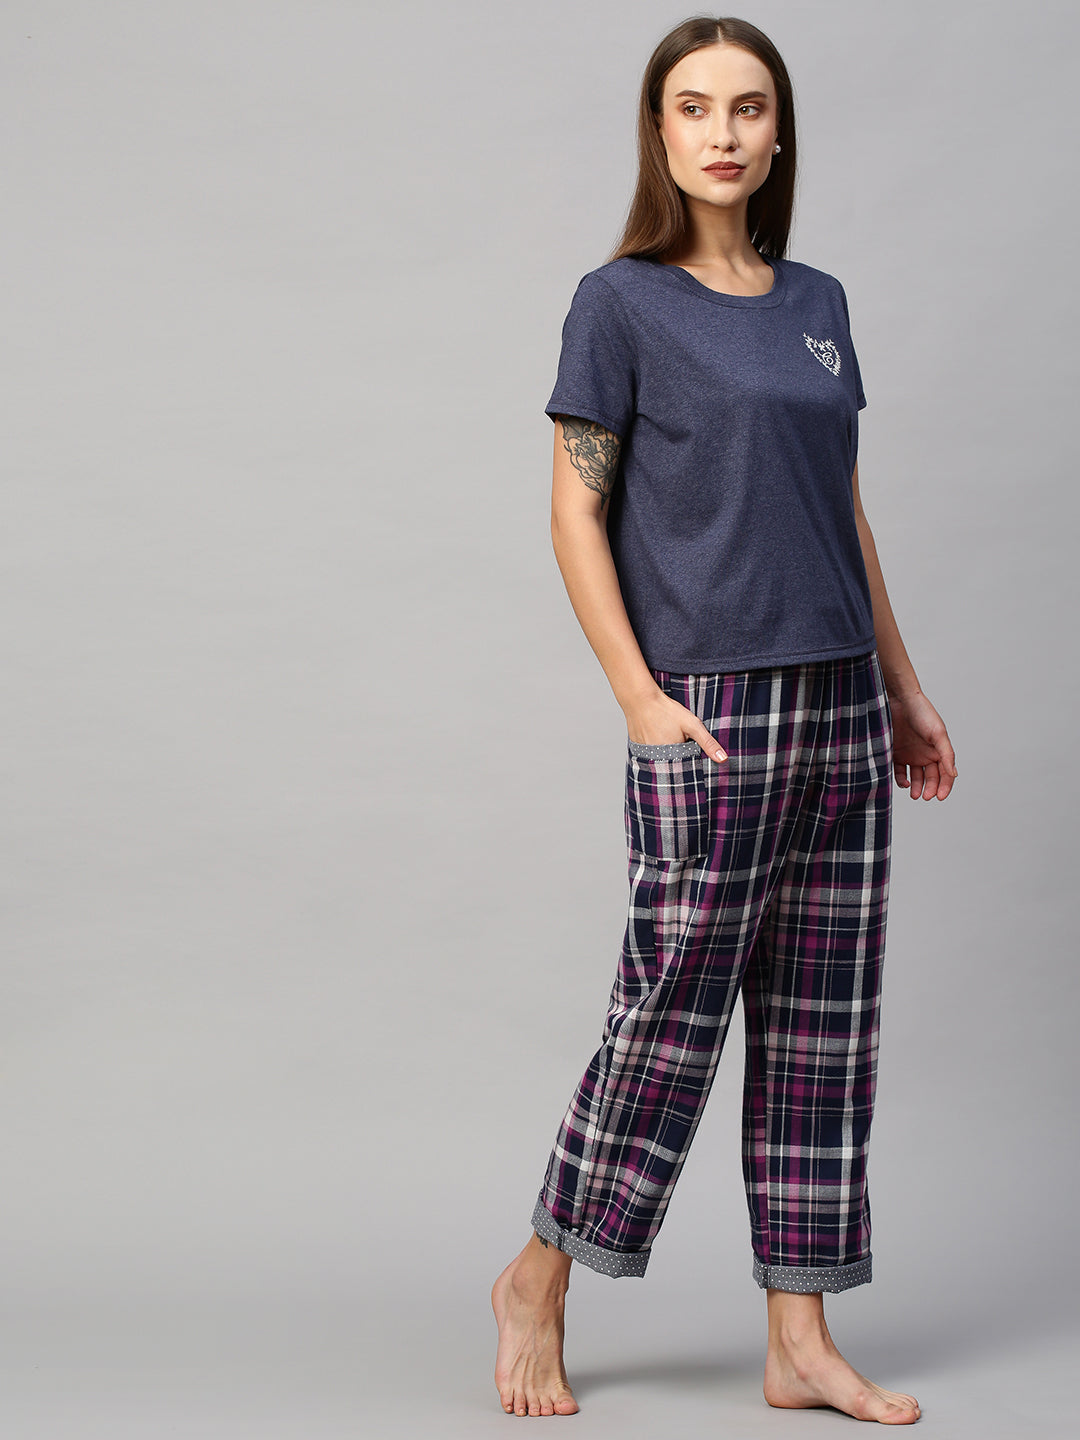 Embroidered Cotton Jersey Tee W/ Plaid Double Fabric Pj's